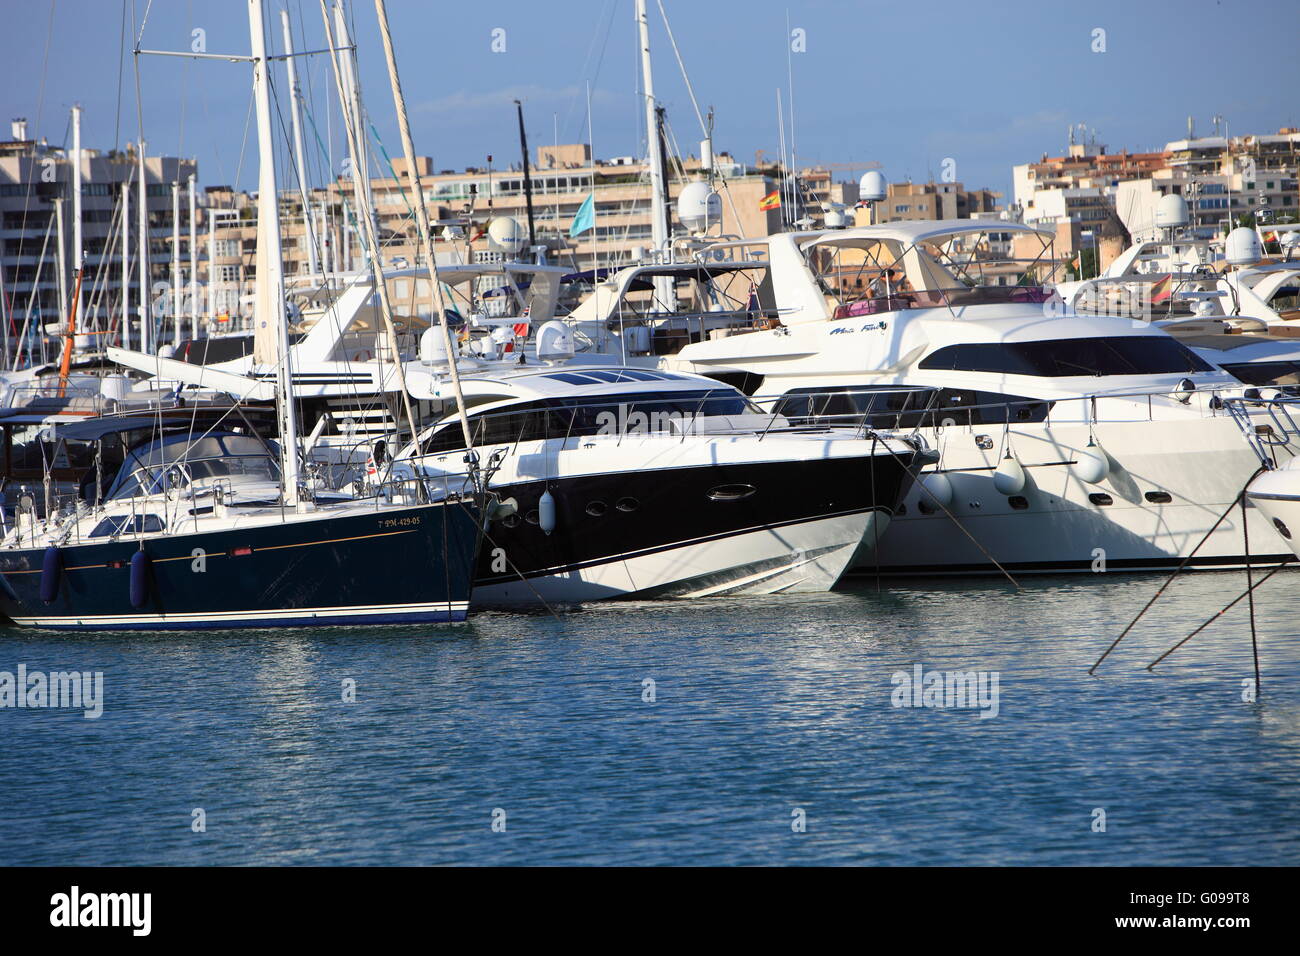 Luxury yachts in harbour Stock Photo